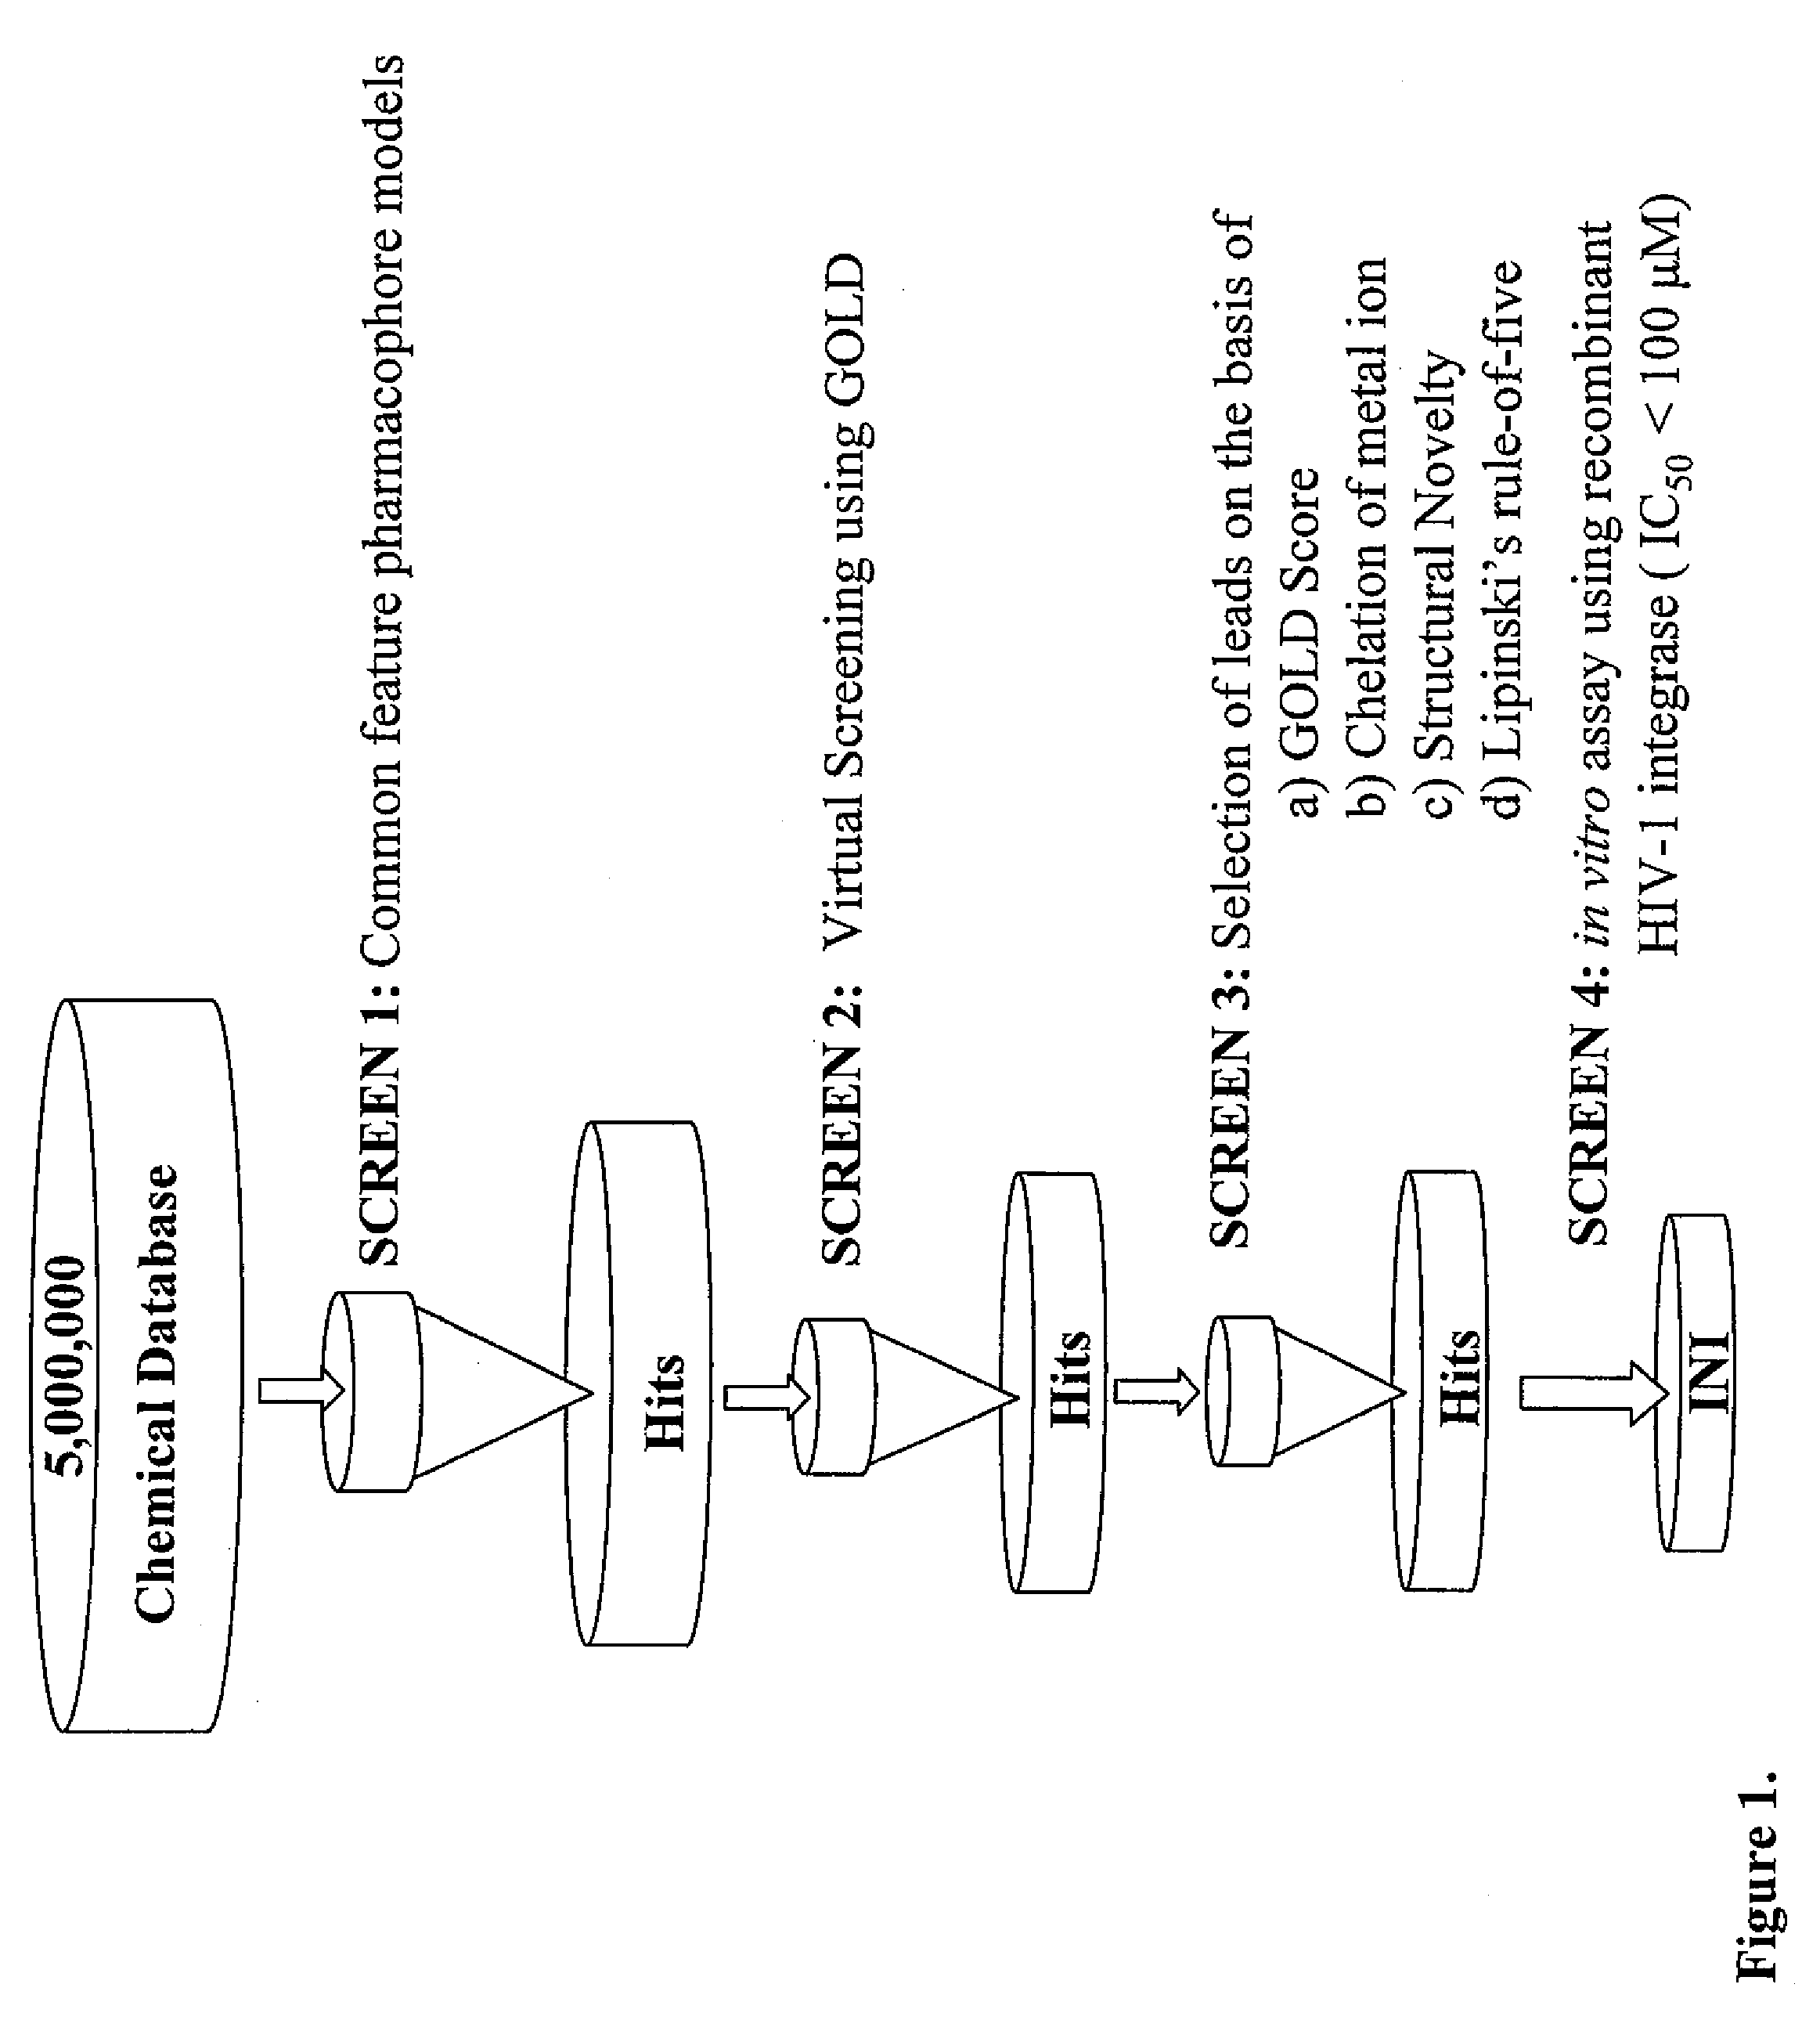 Compounds with HIV-1 integrase inhibitory activity and use thereof as anti-HIV/AIDS therapeutics